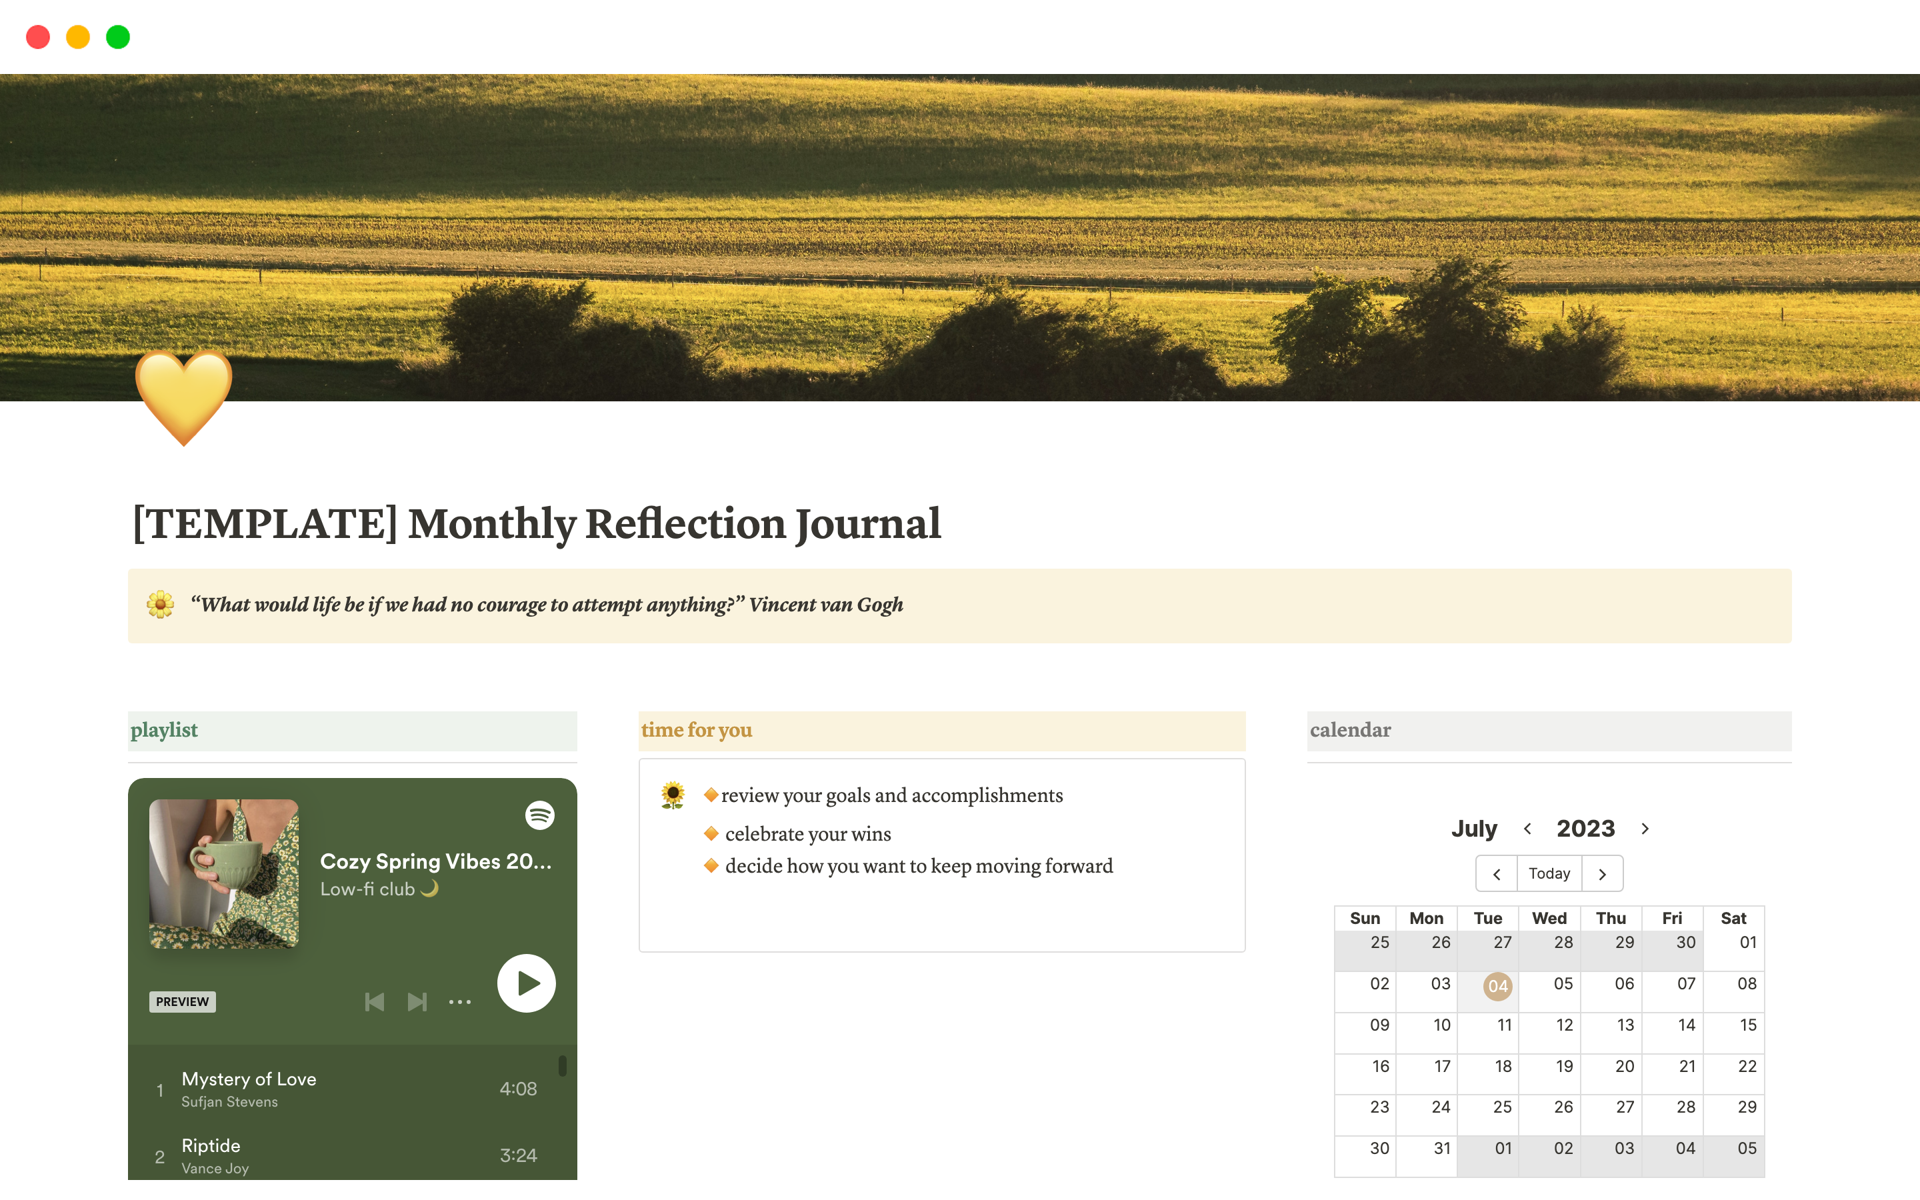 📙 This Monthly Reflection Journal and 5 simple questions will help you easy to look back and reflect on your actions and thoughts for the month.